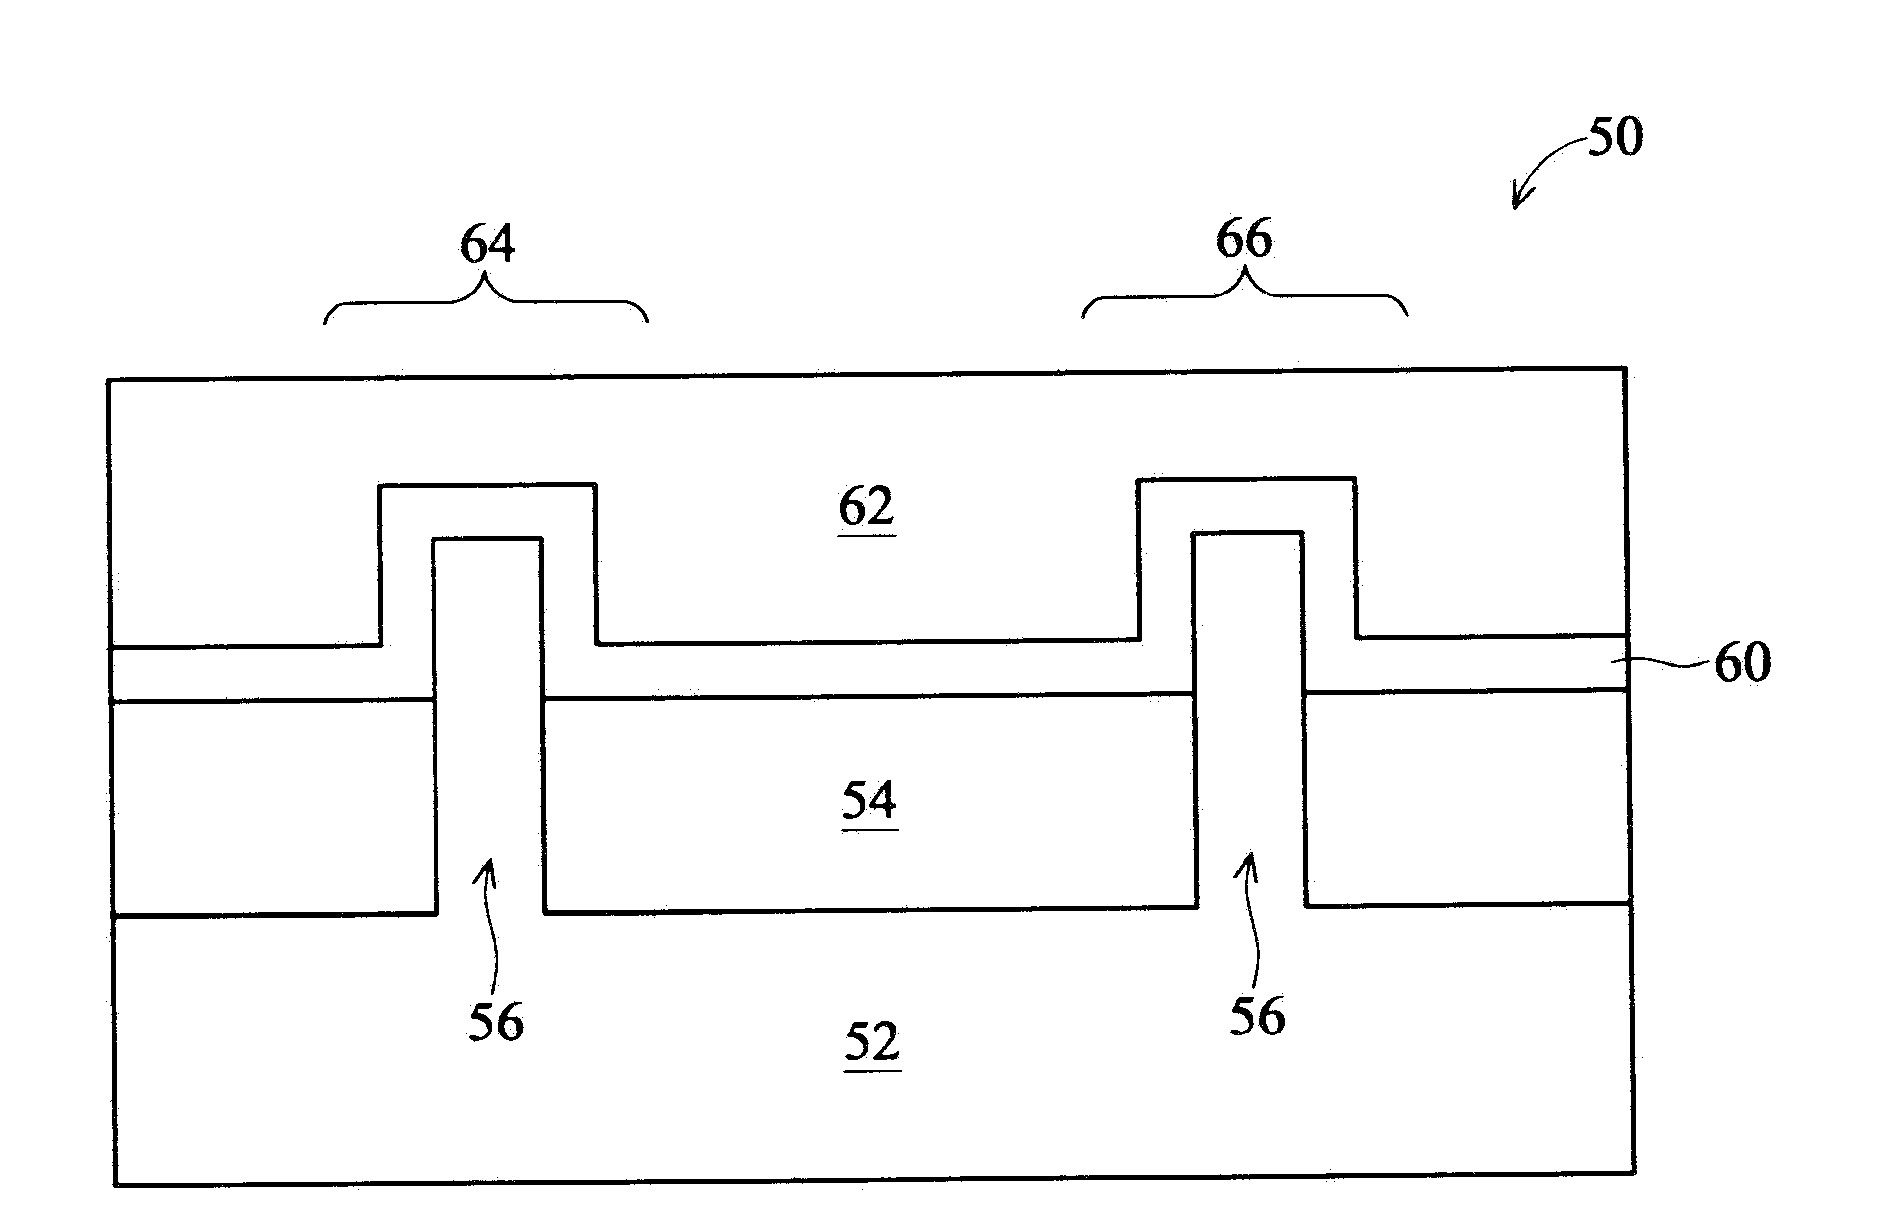 Layout for multiple-fin SRAM cell